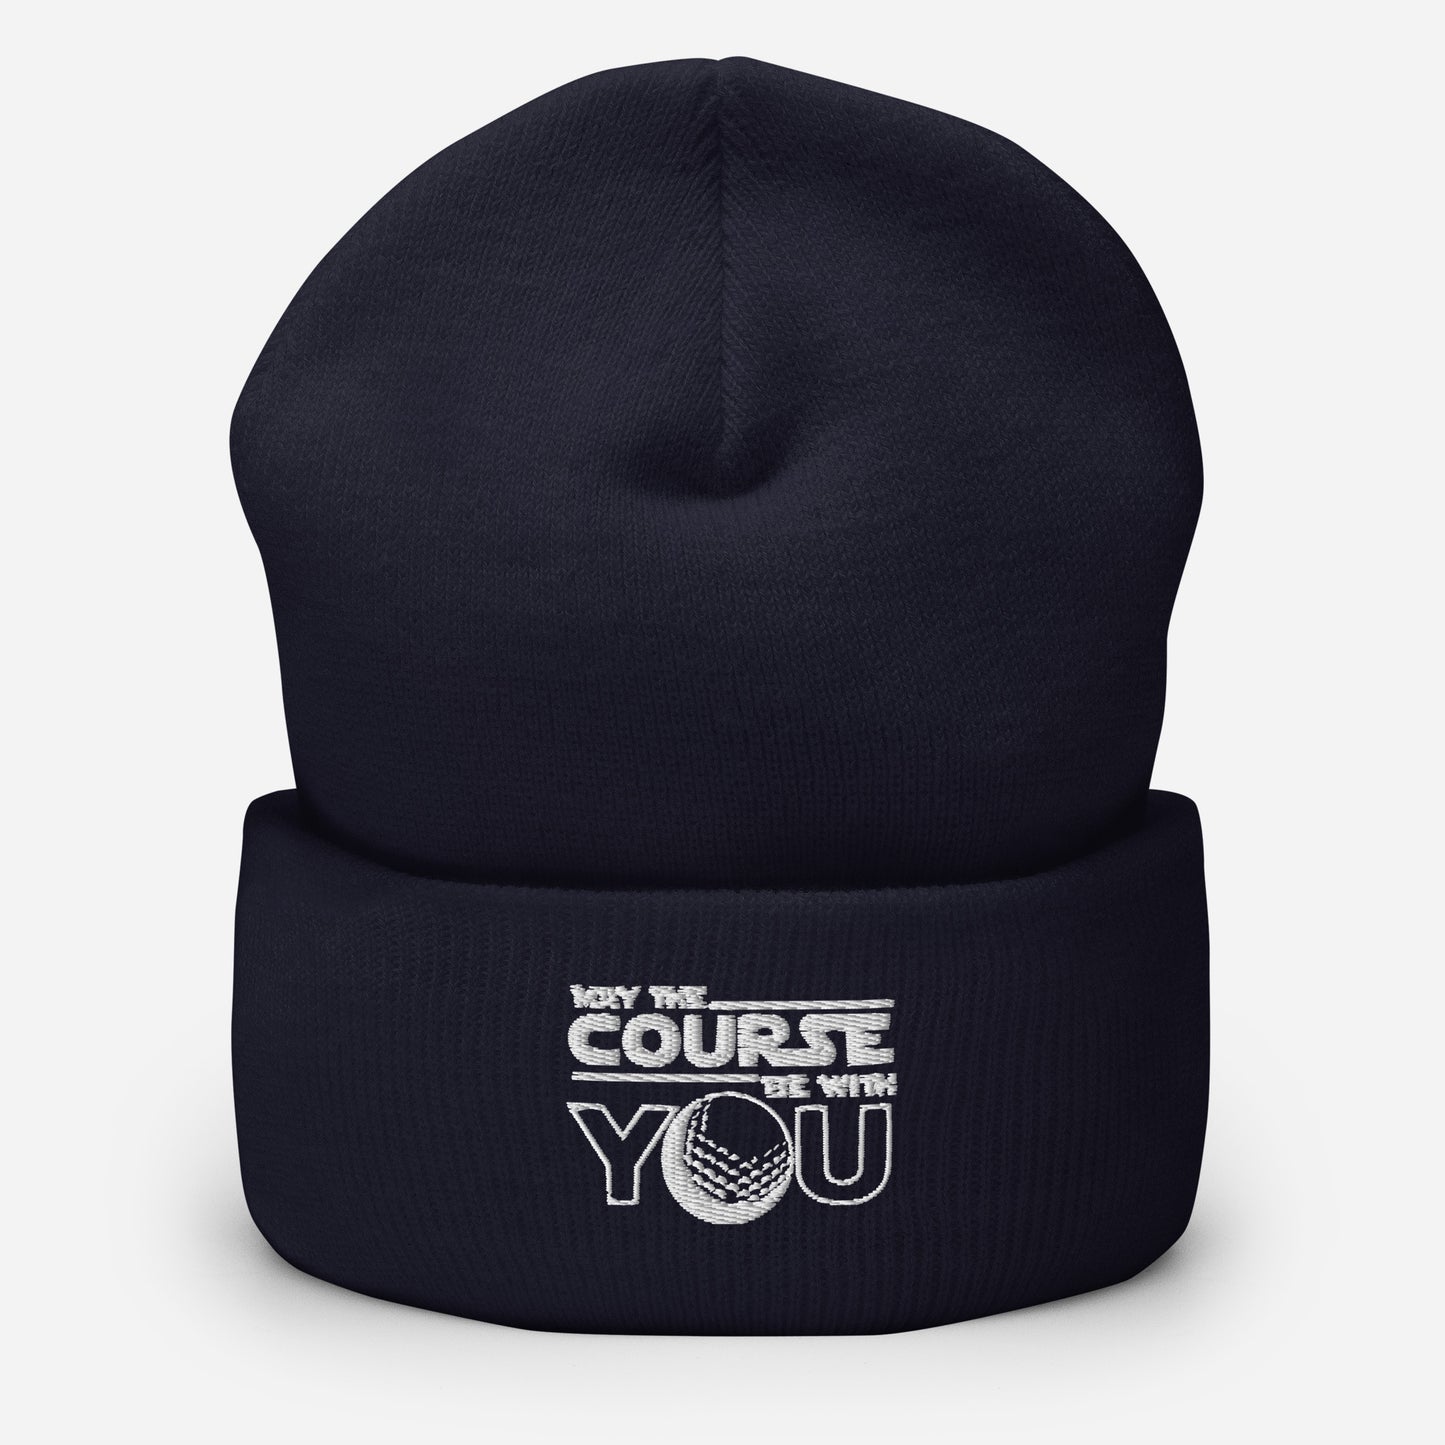 May The Course Be With You Beanie (Black, Red, Dark Grey, Navy, Green)